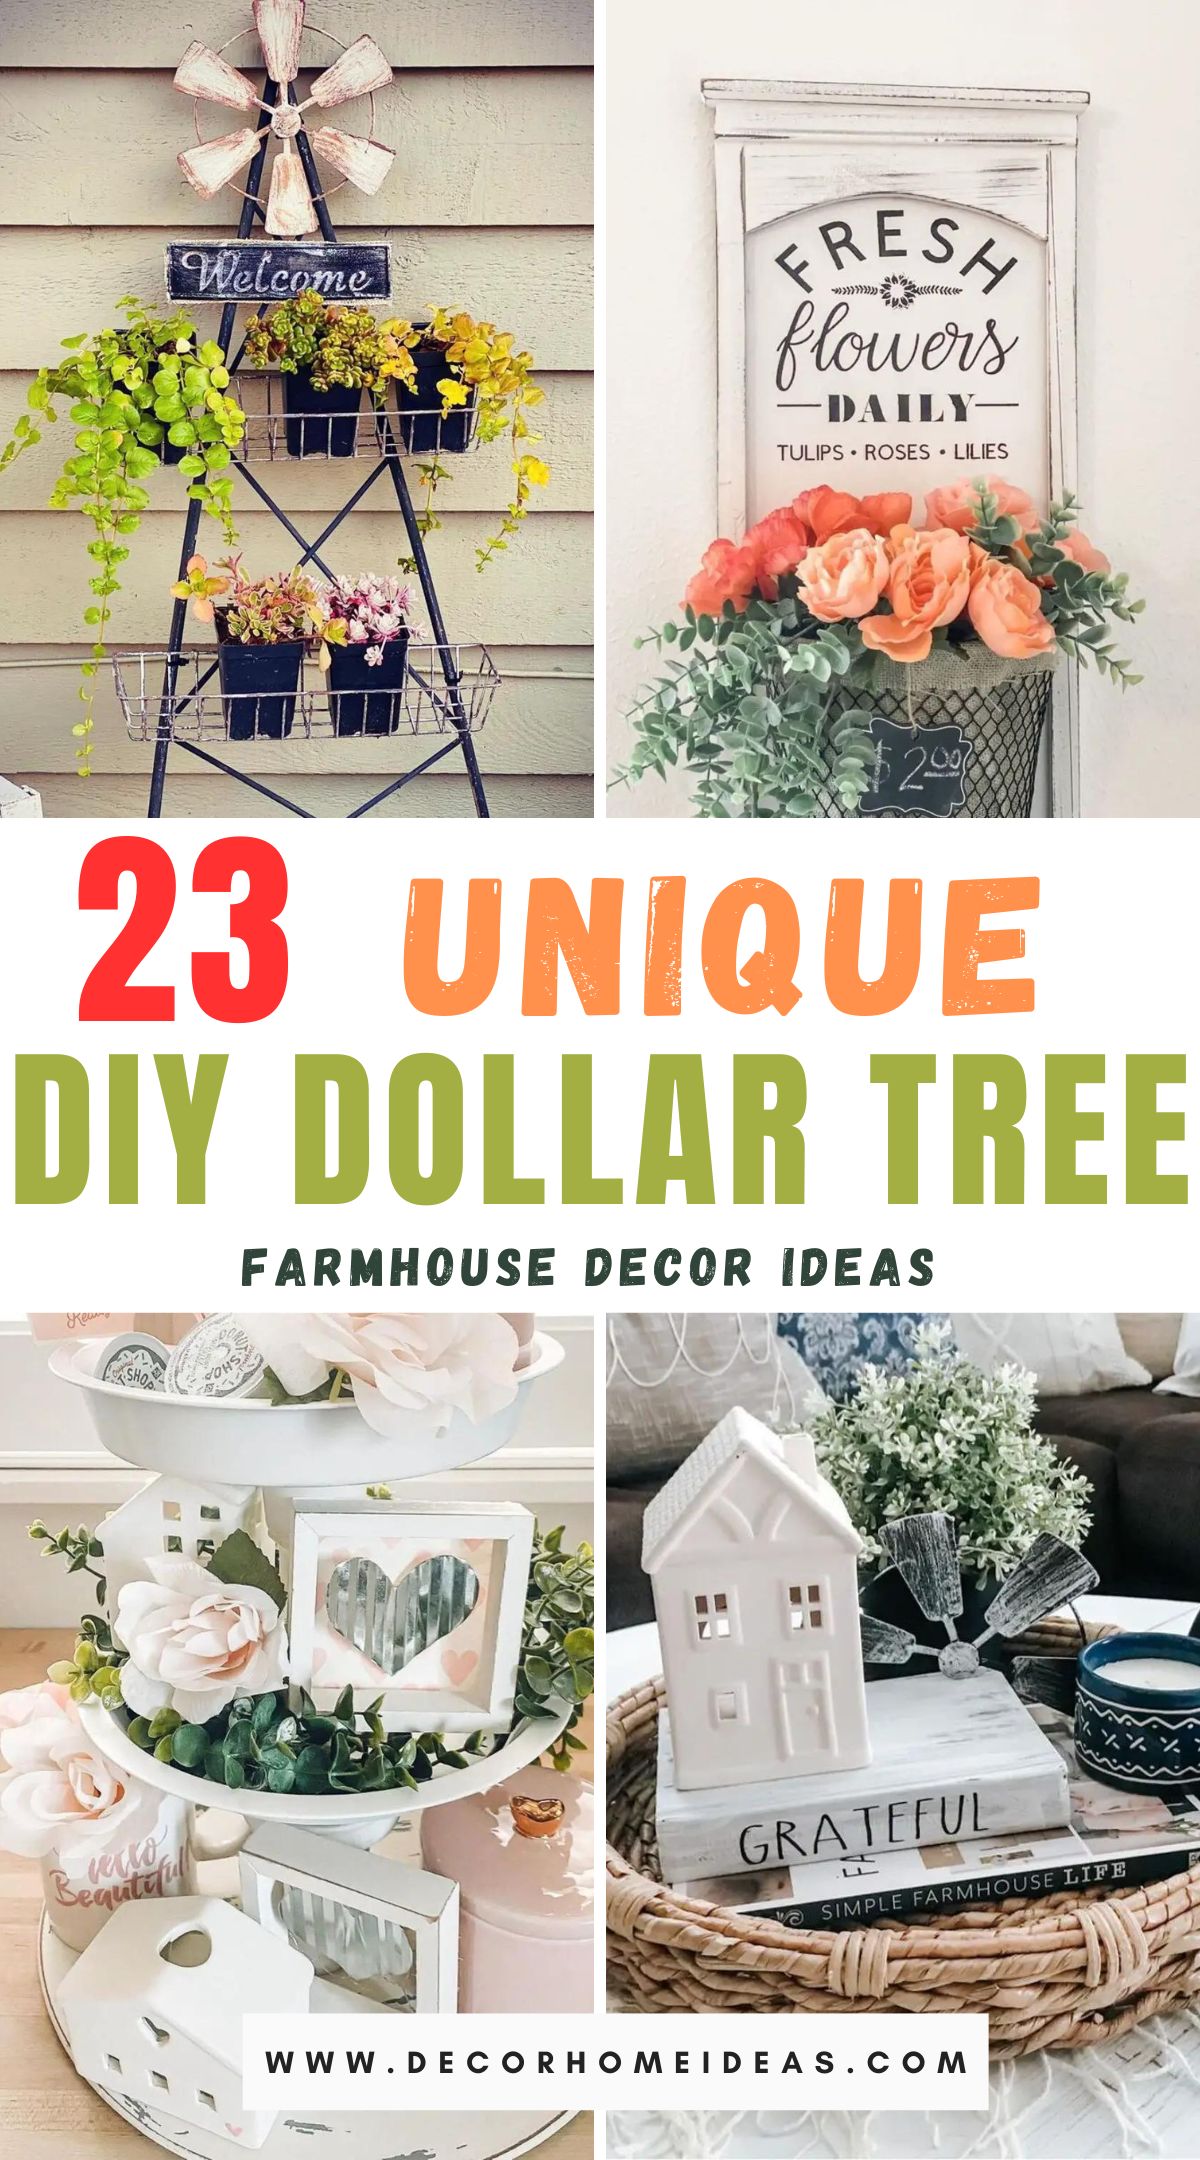 Transform your home on a budget with these 23 unique DIY Dollar Tree farmhouse decor ideas. Discover affordable and creative solutions to add rustic charm and style to your living spaces.